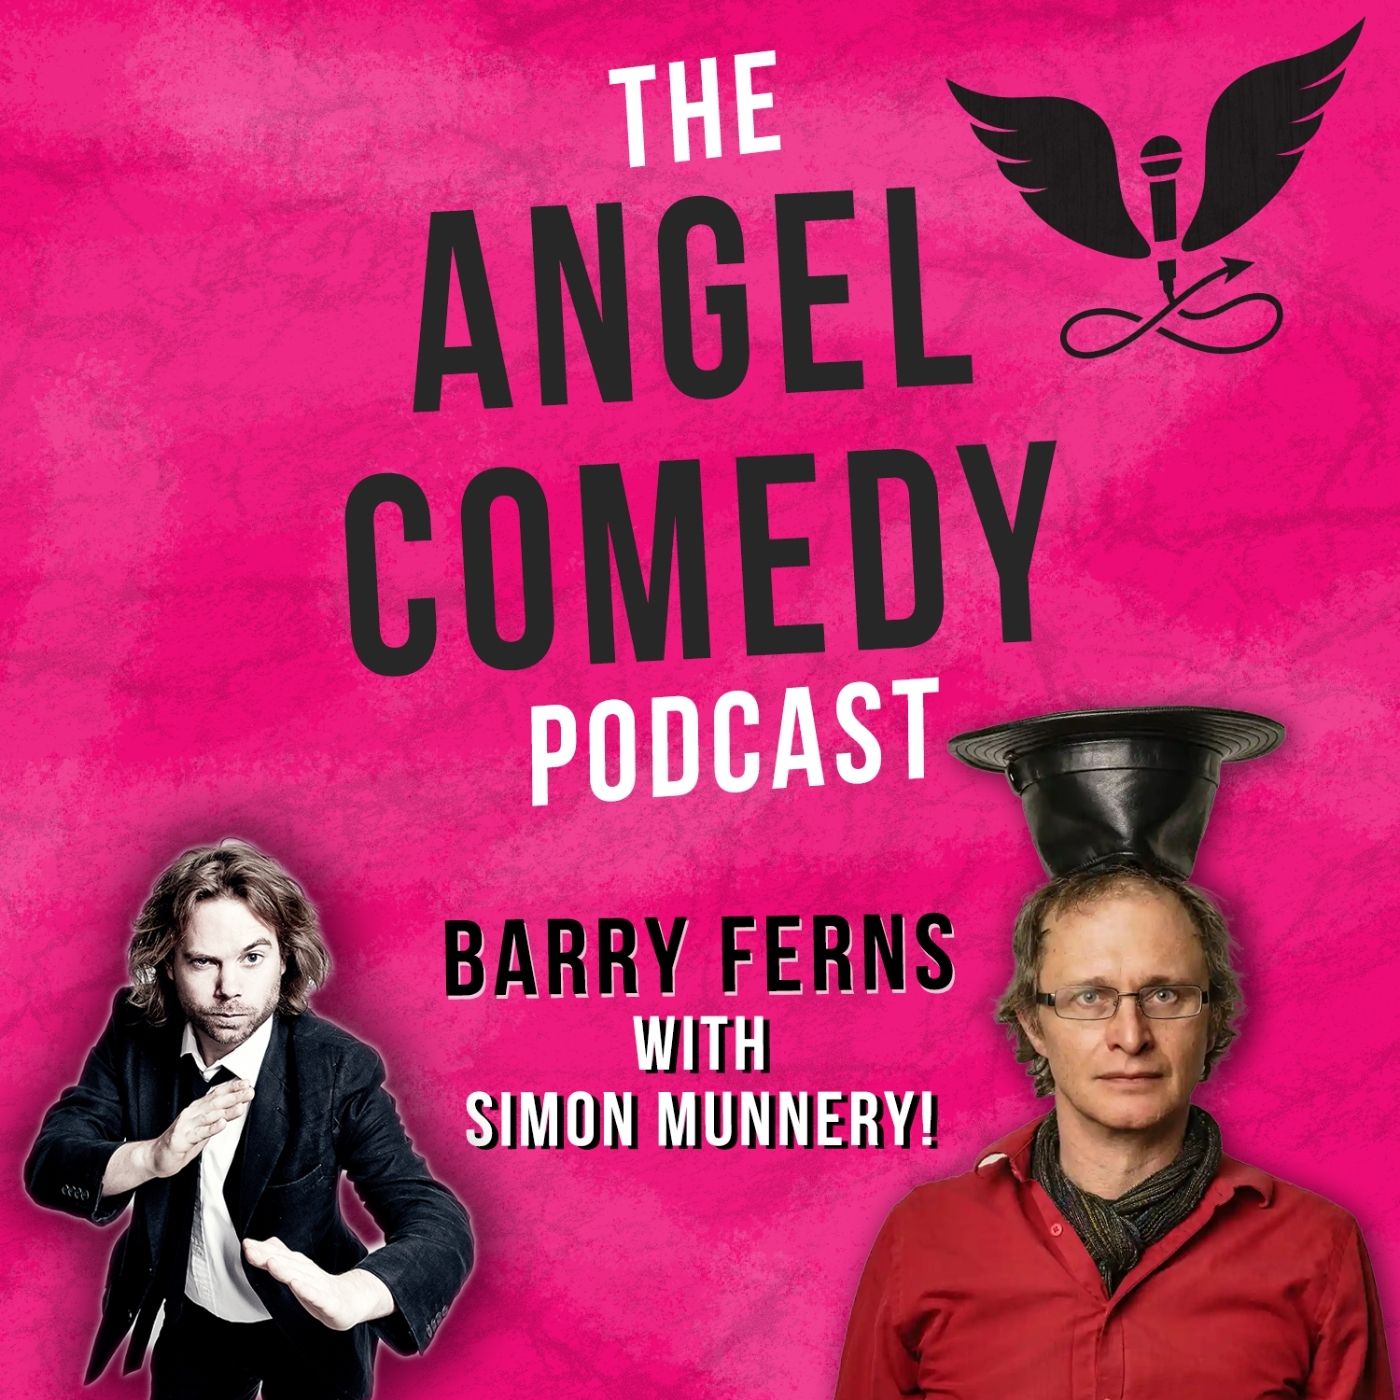 Podcast: The Angel Comedy Podcast with Simon Munnery - Angel Comedy